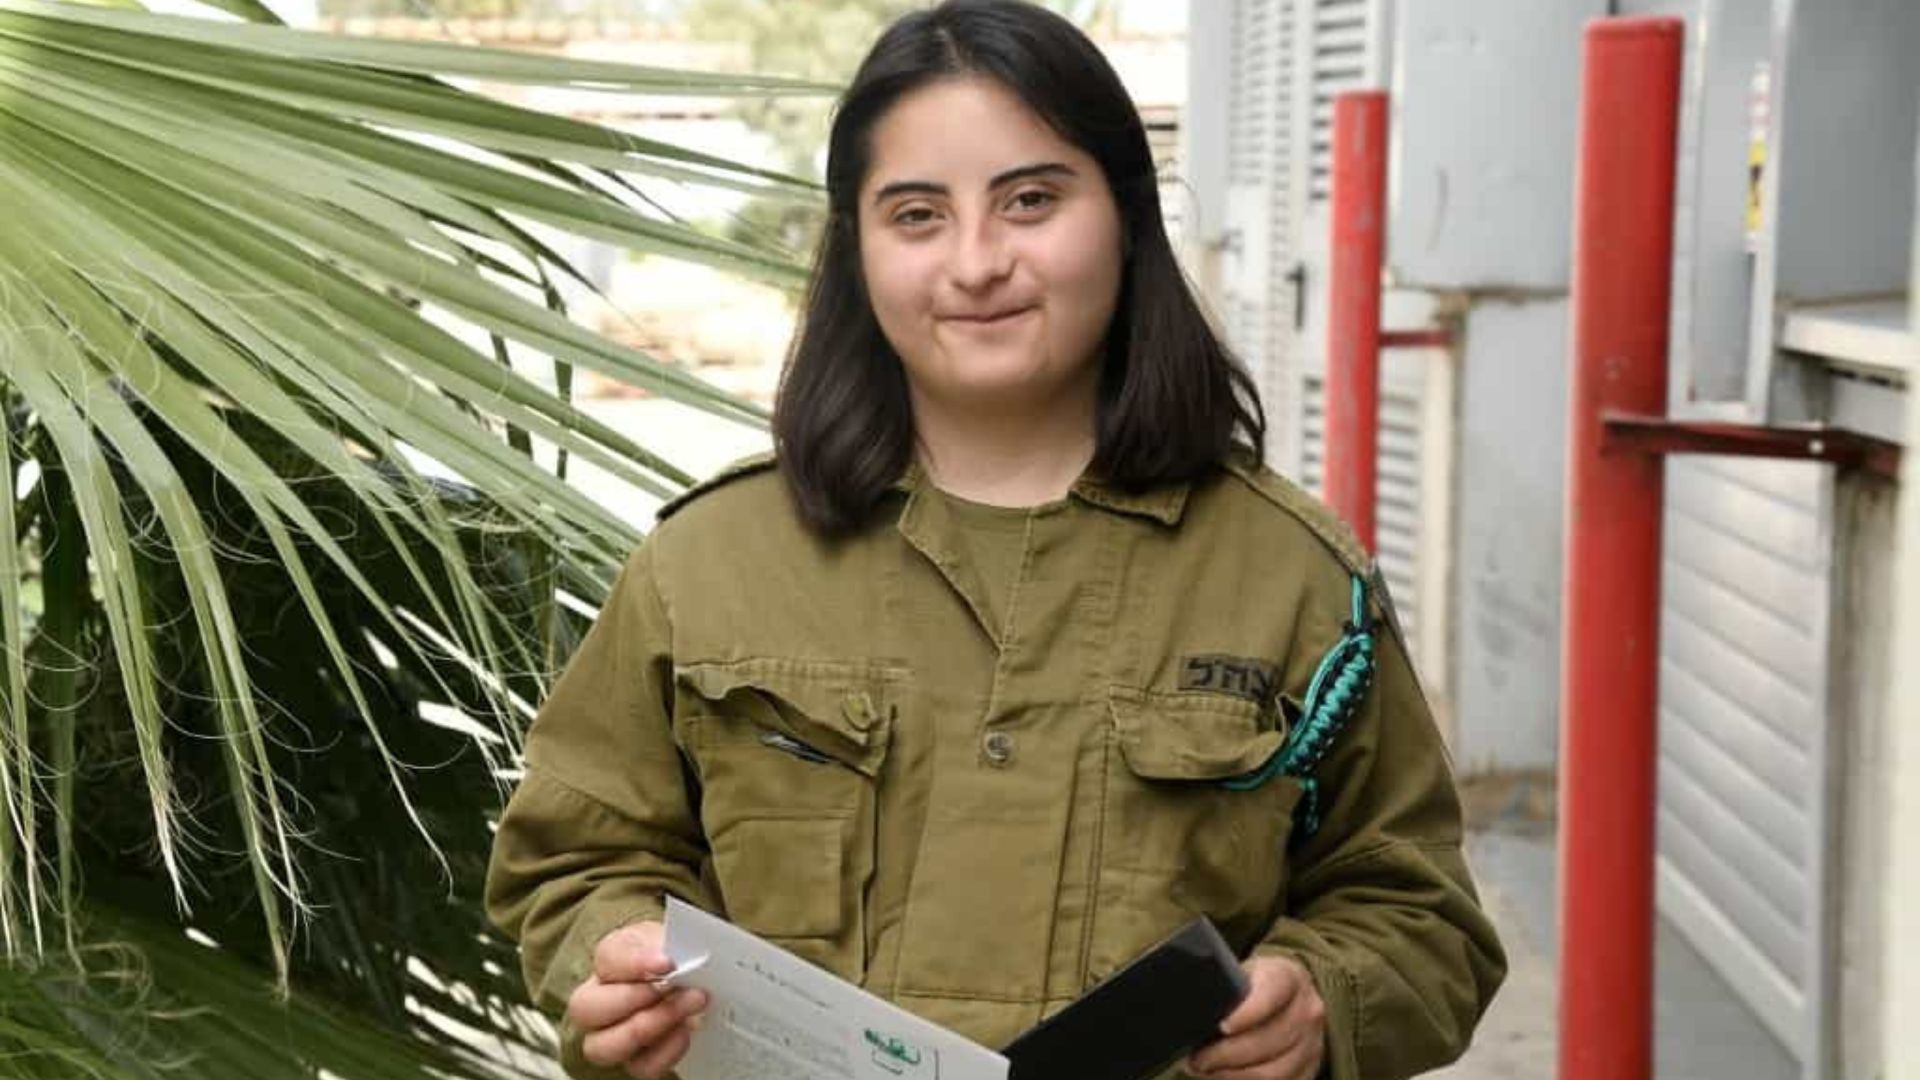 IDF soldier with Down’s syndrome swaps army uniform for chef’s hat - St ...